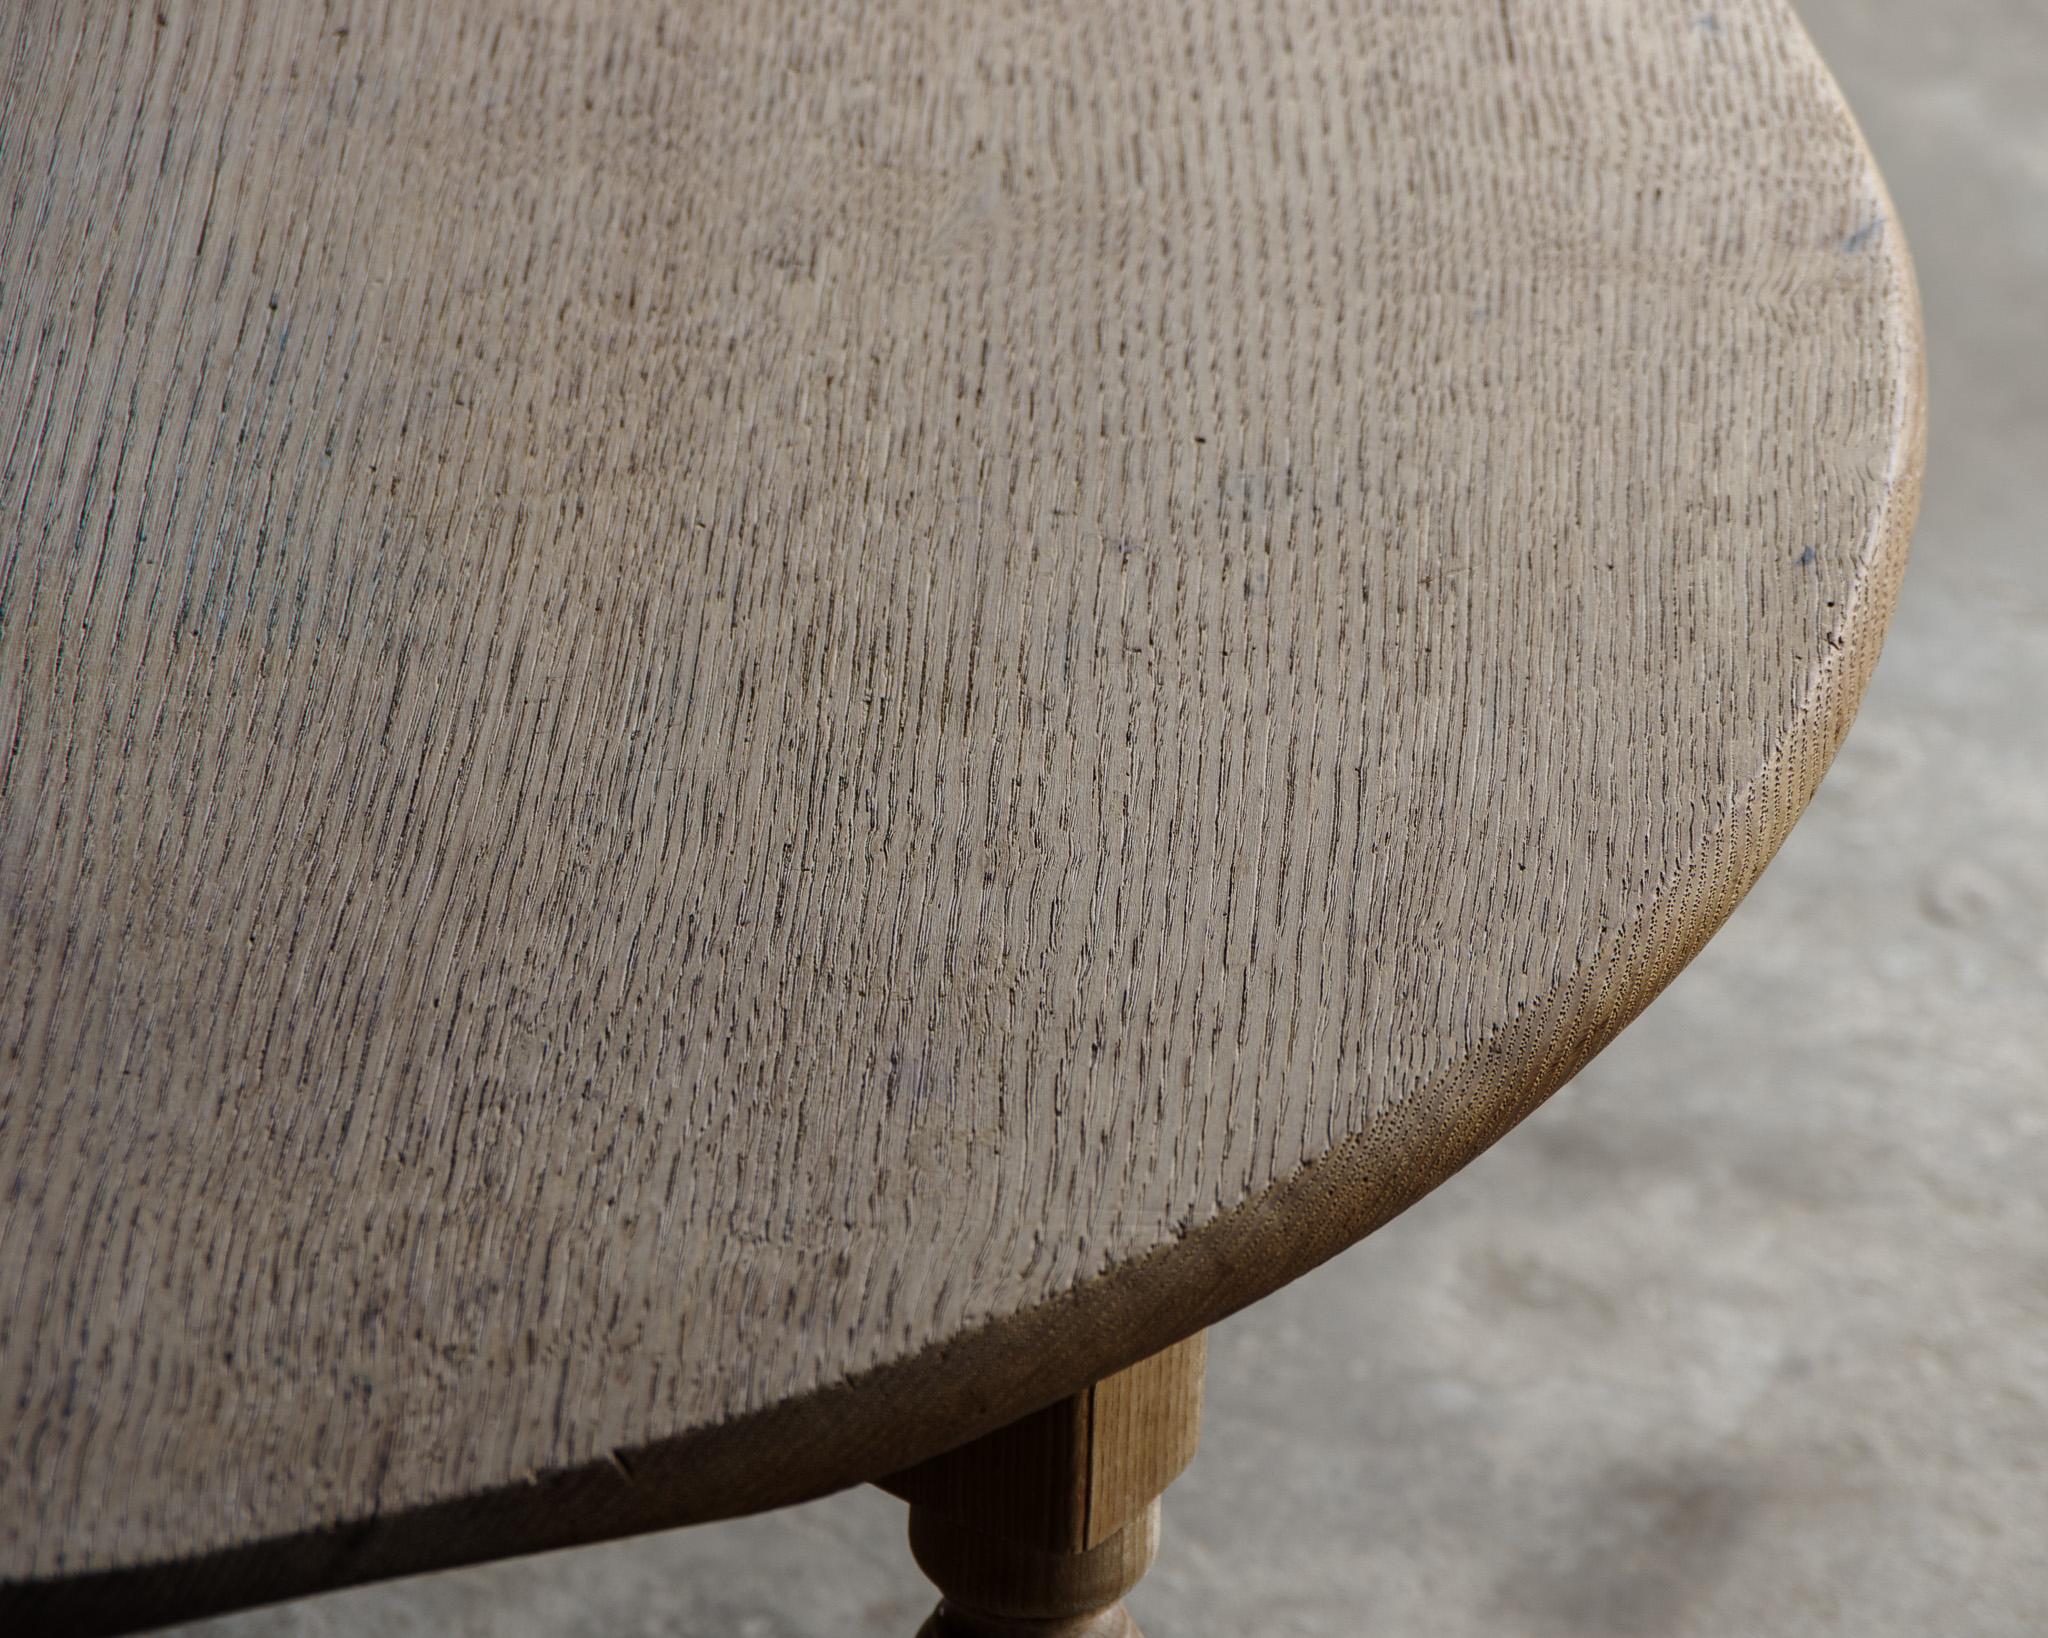 Japanese antique round table 